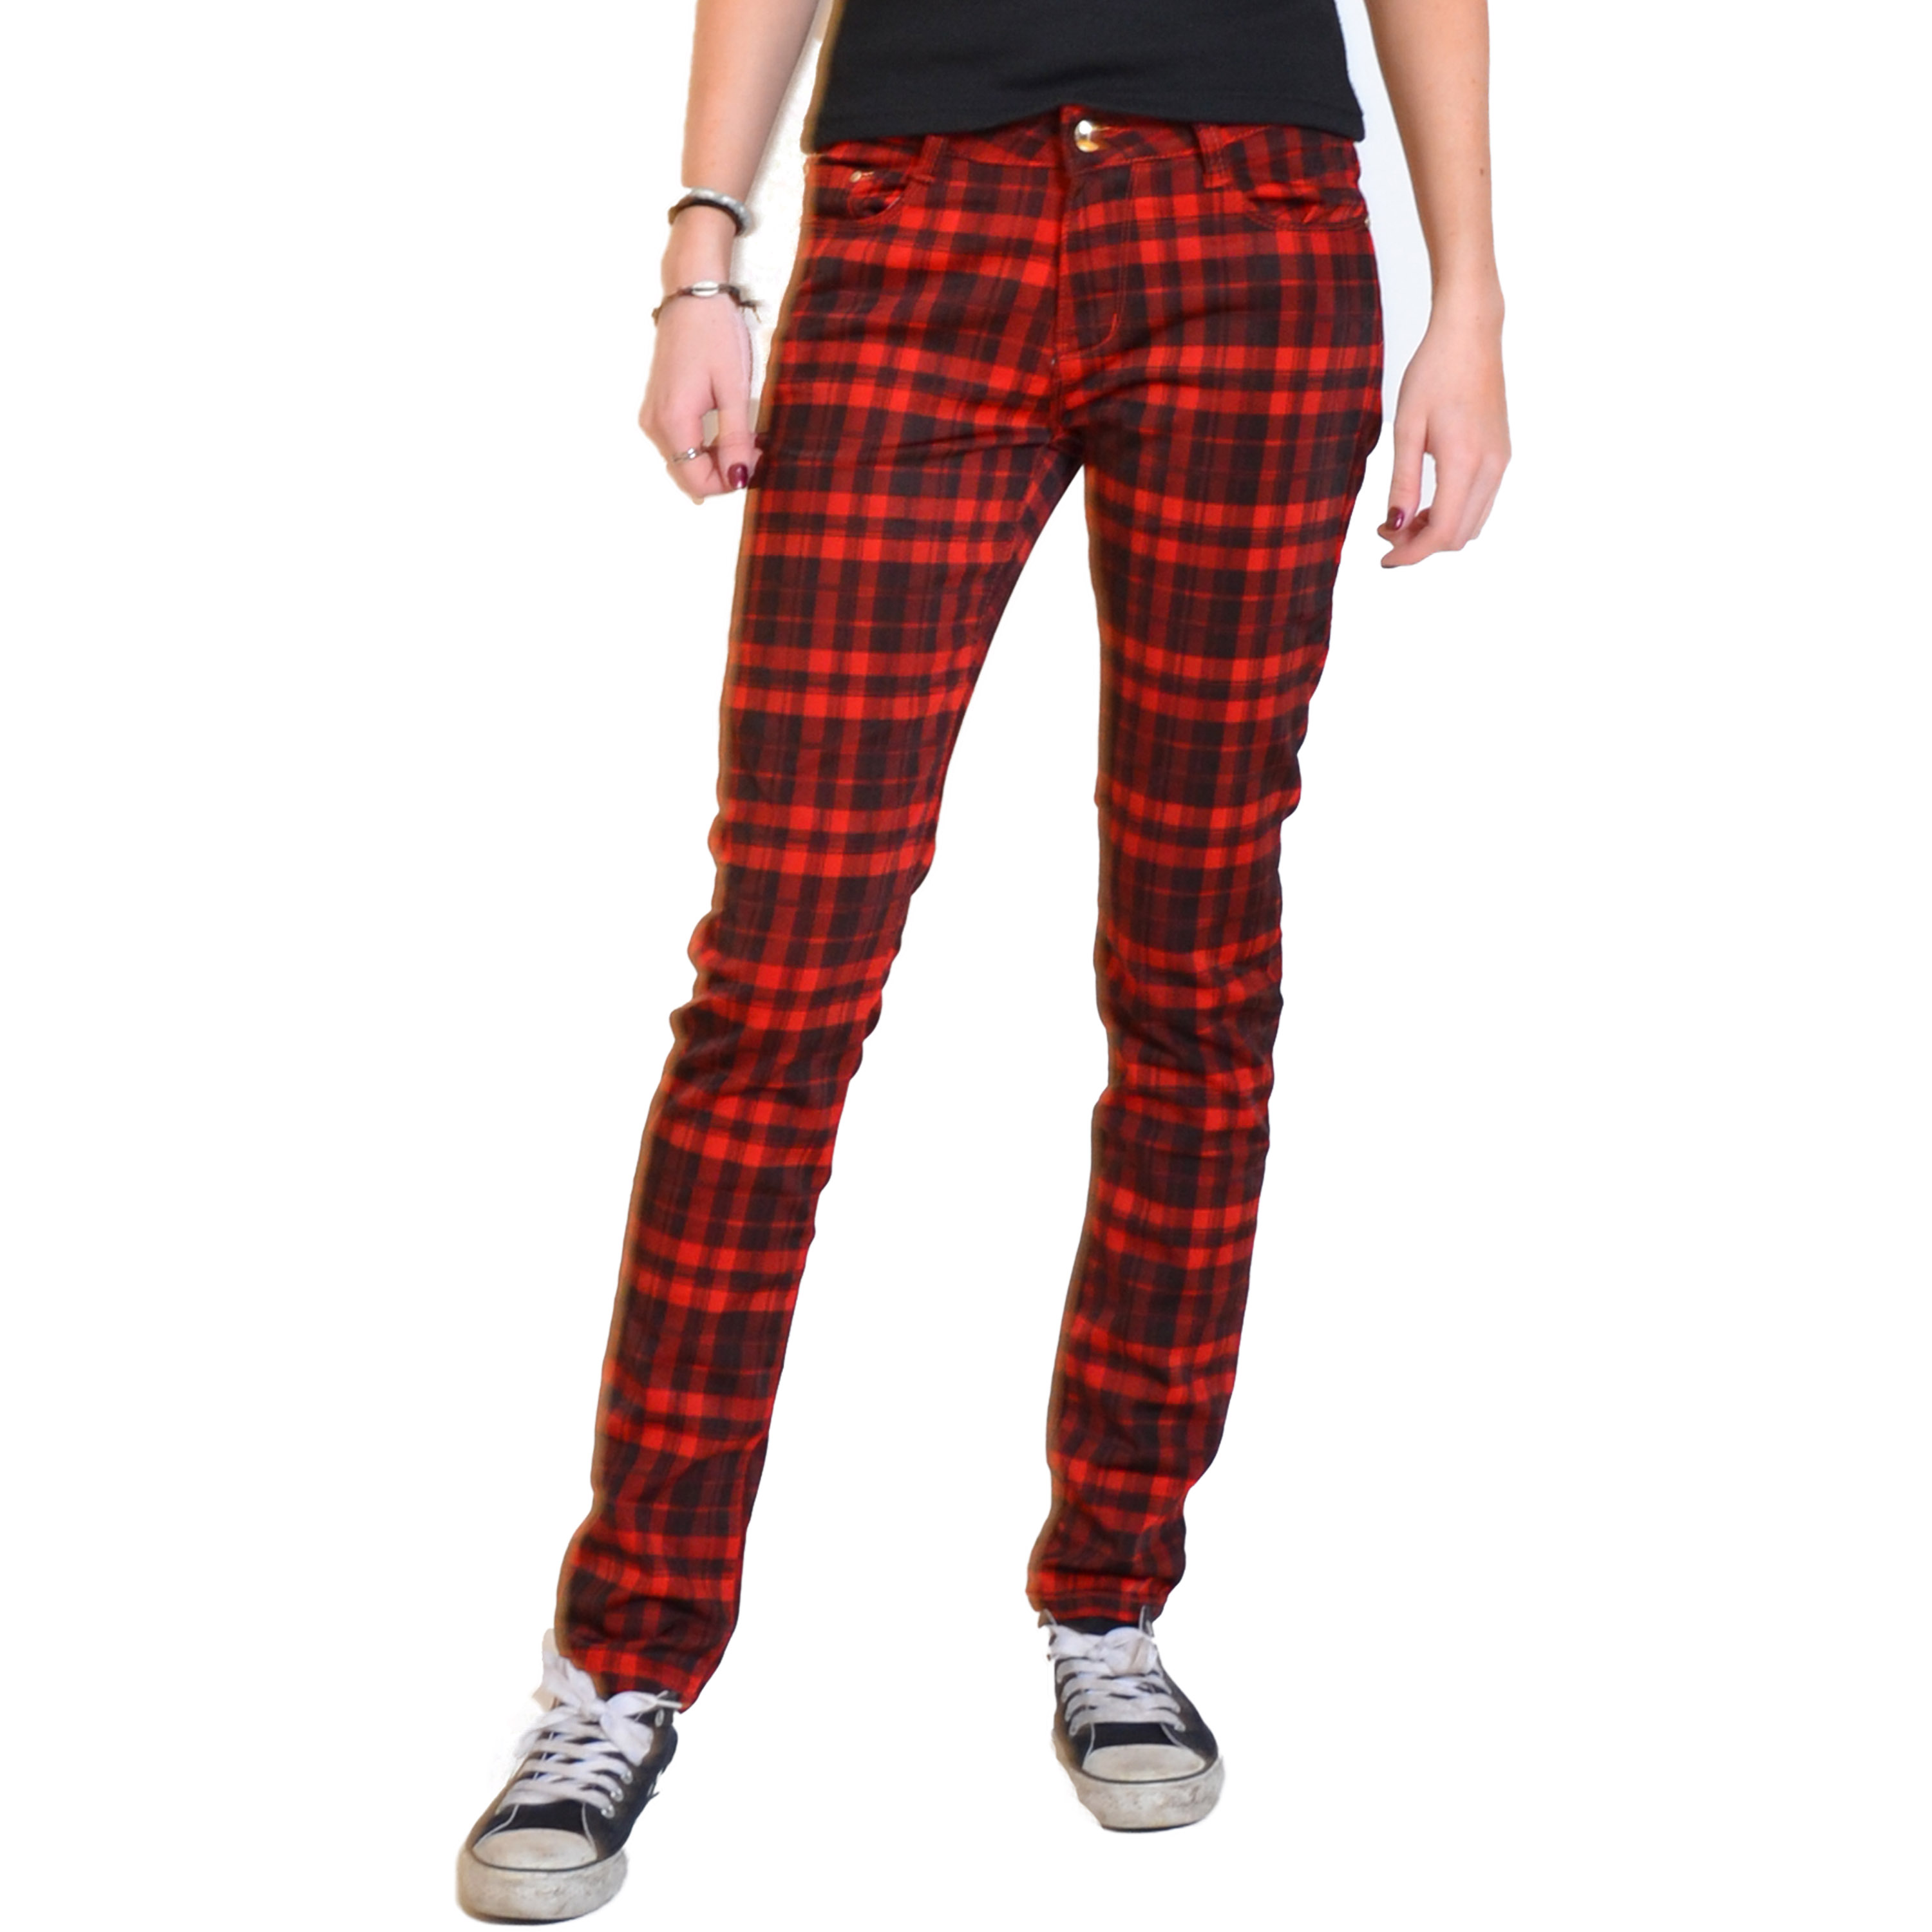 red and black check pants